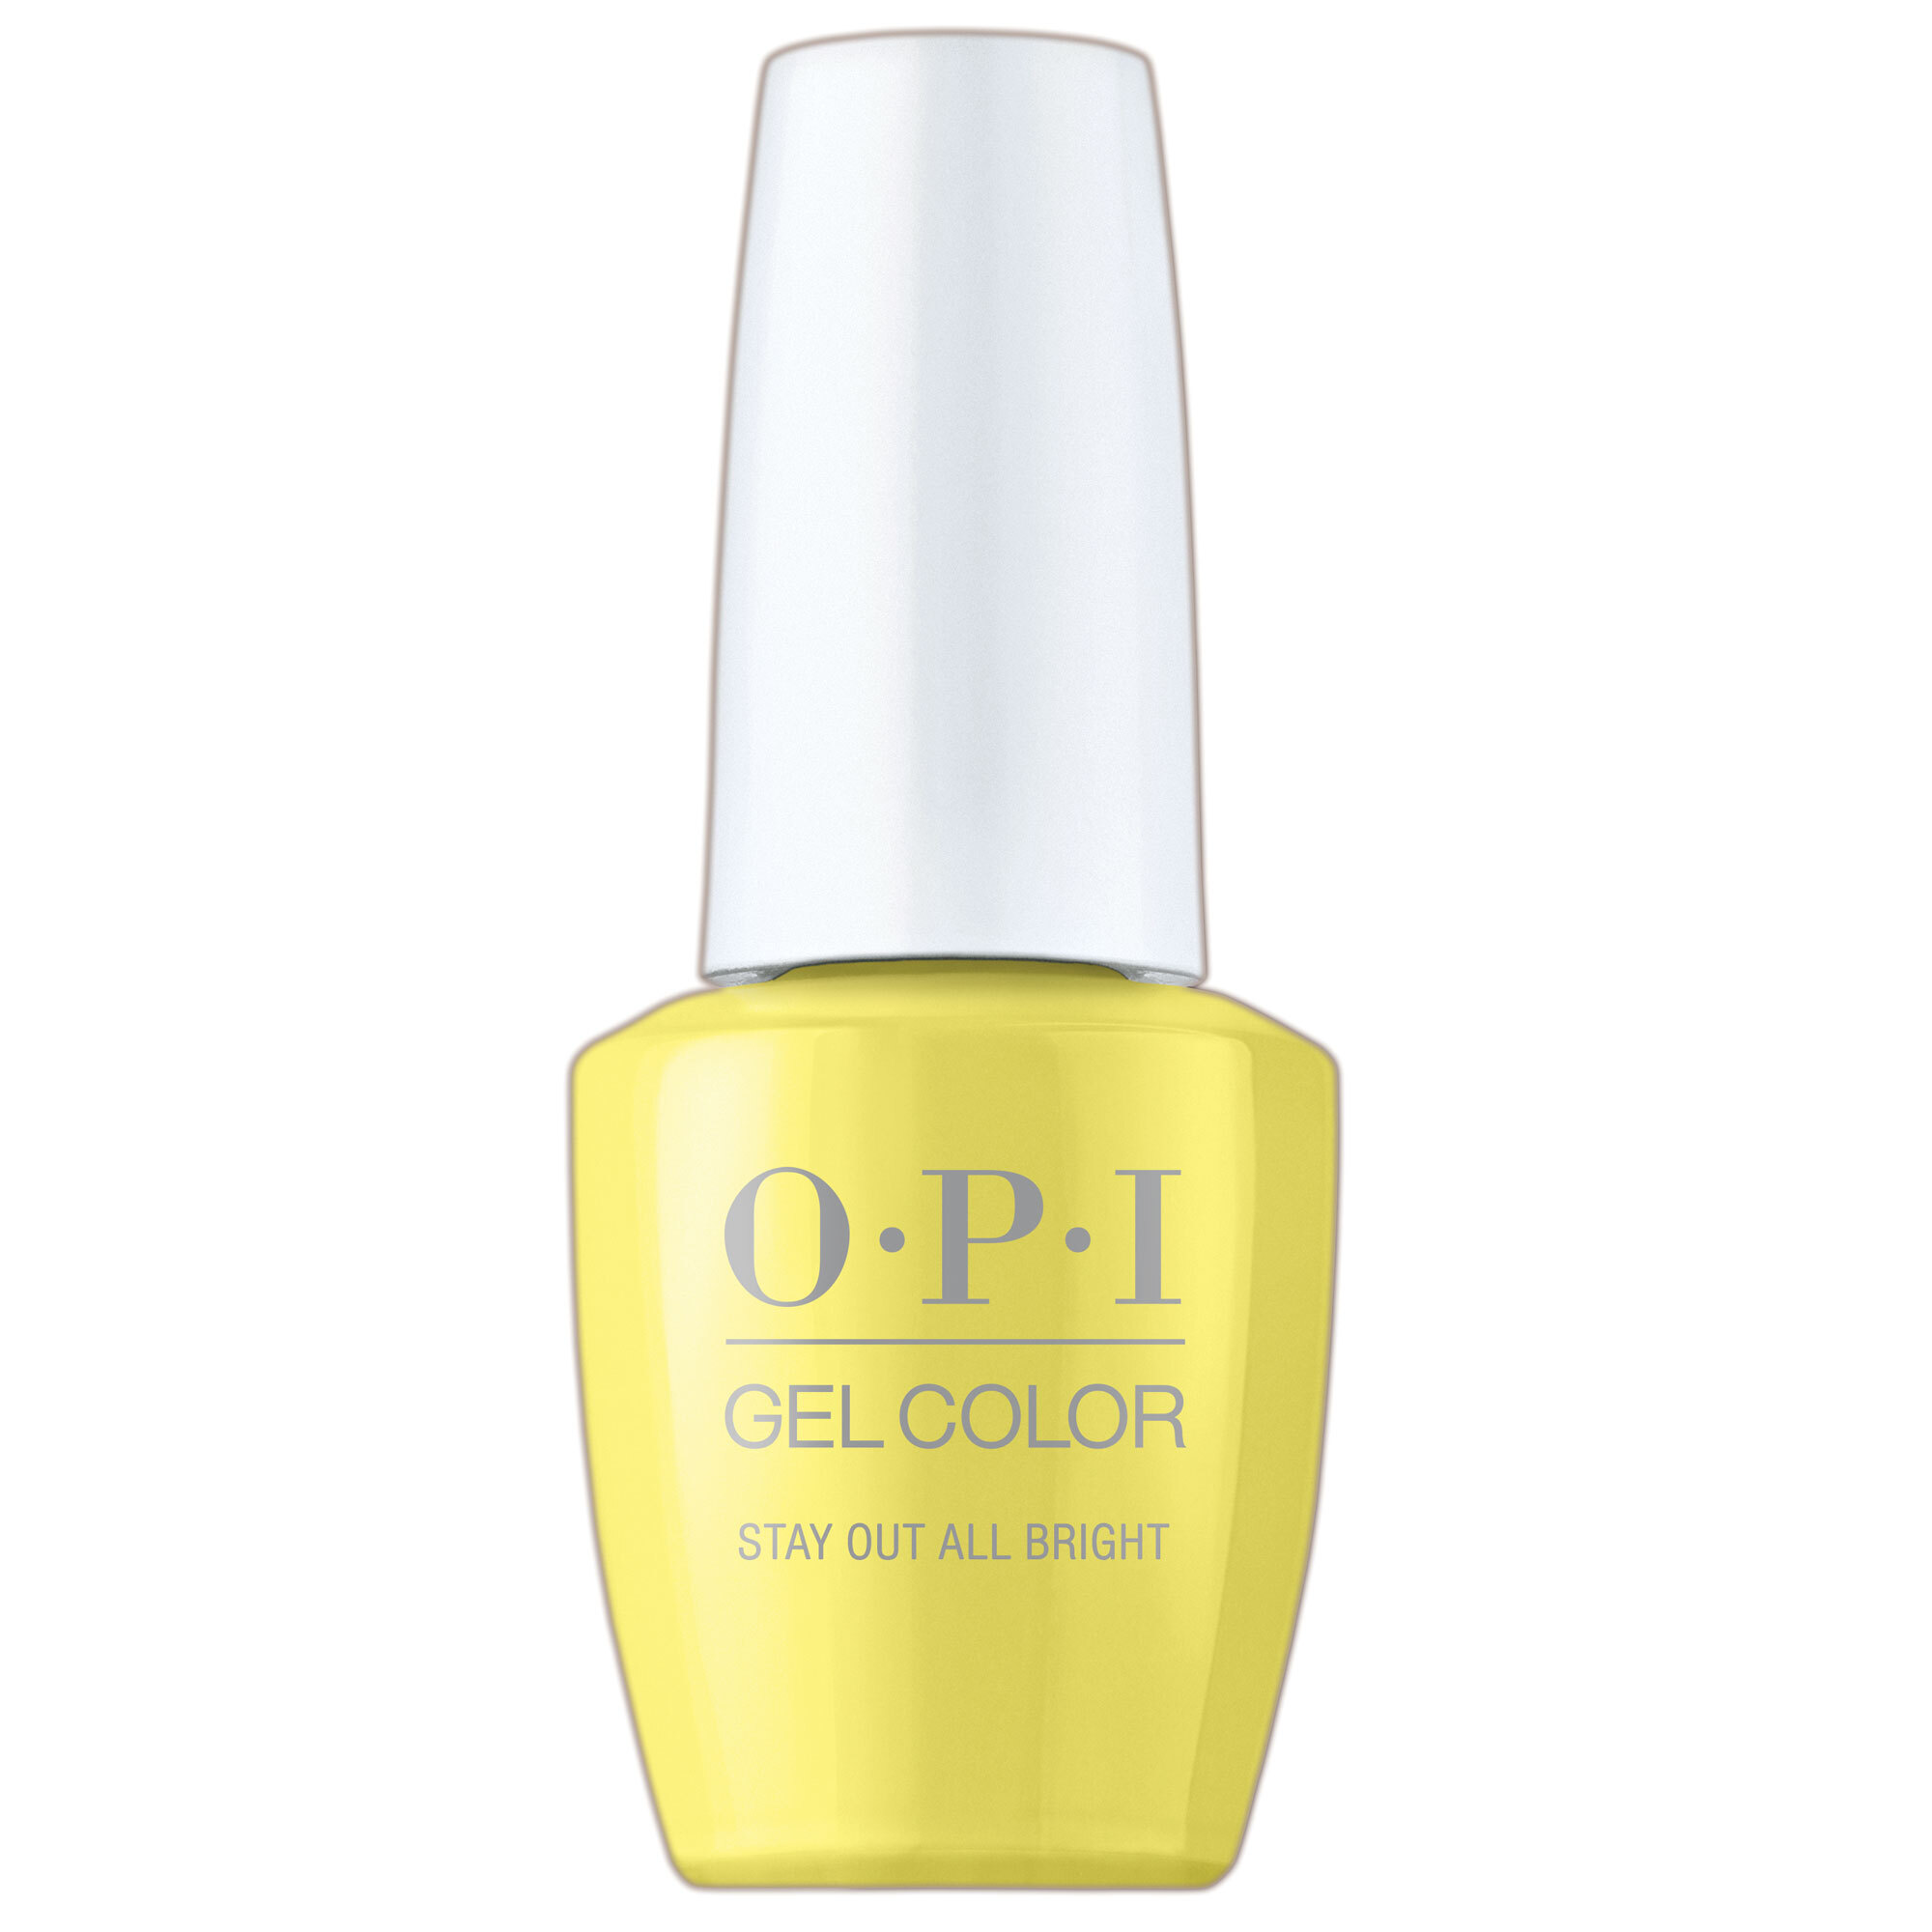 OPI Gel Color 360 - GelColor Stay Out All Bright